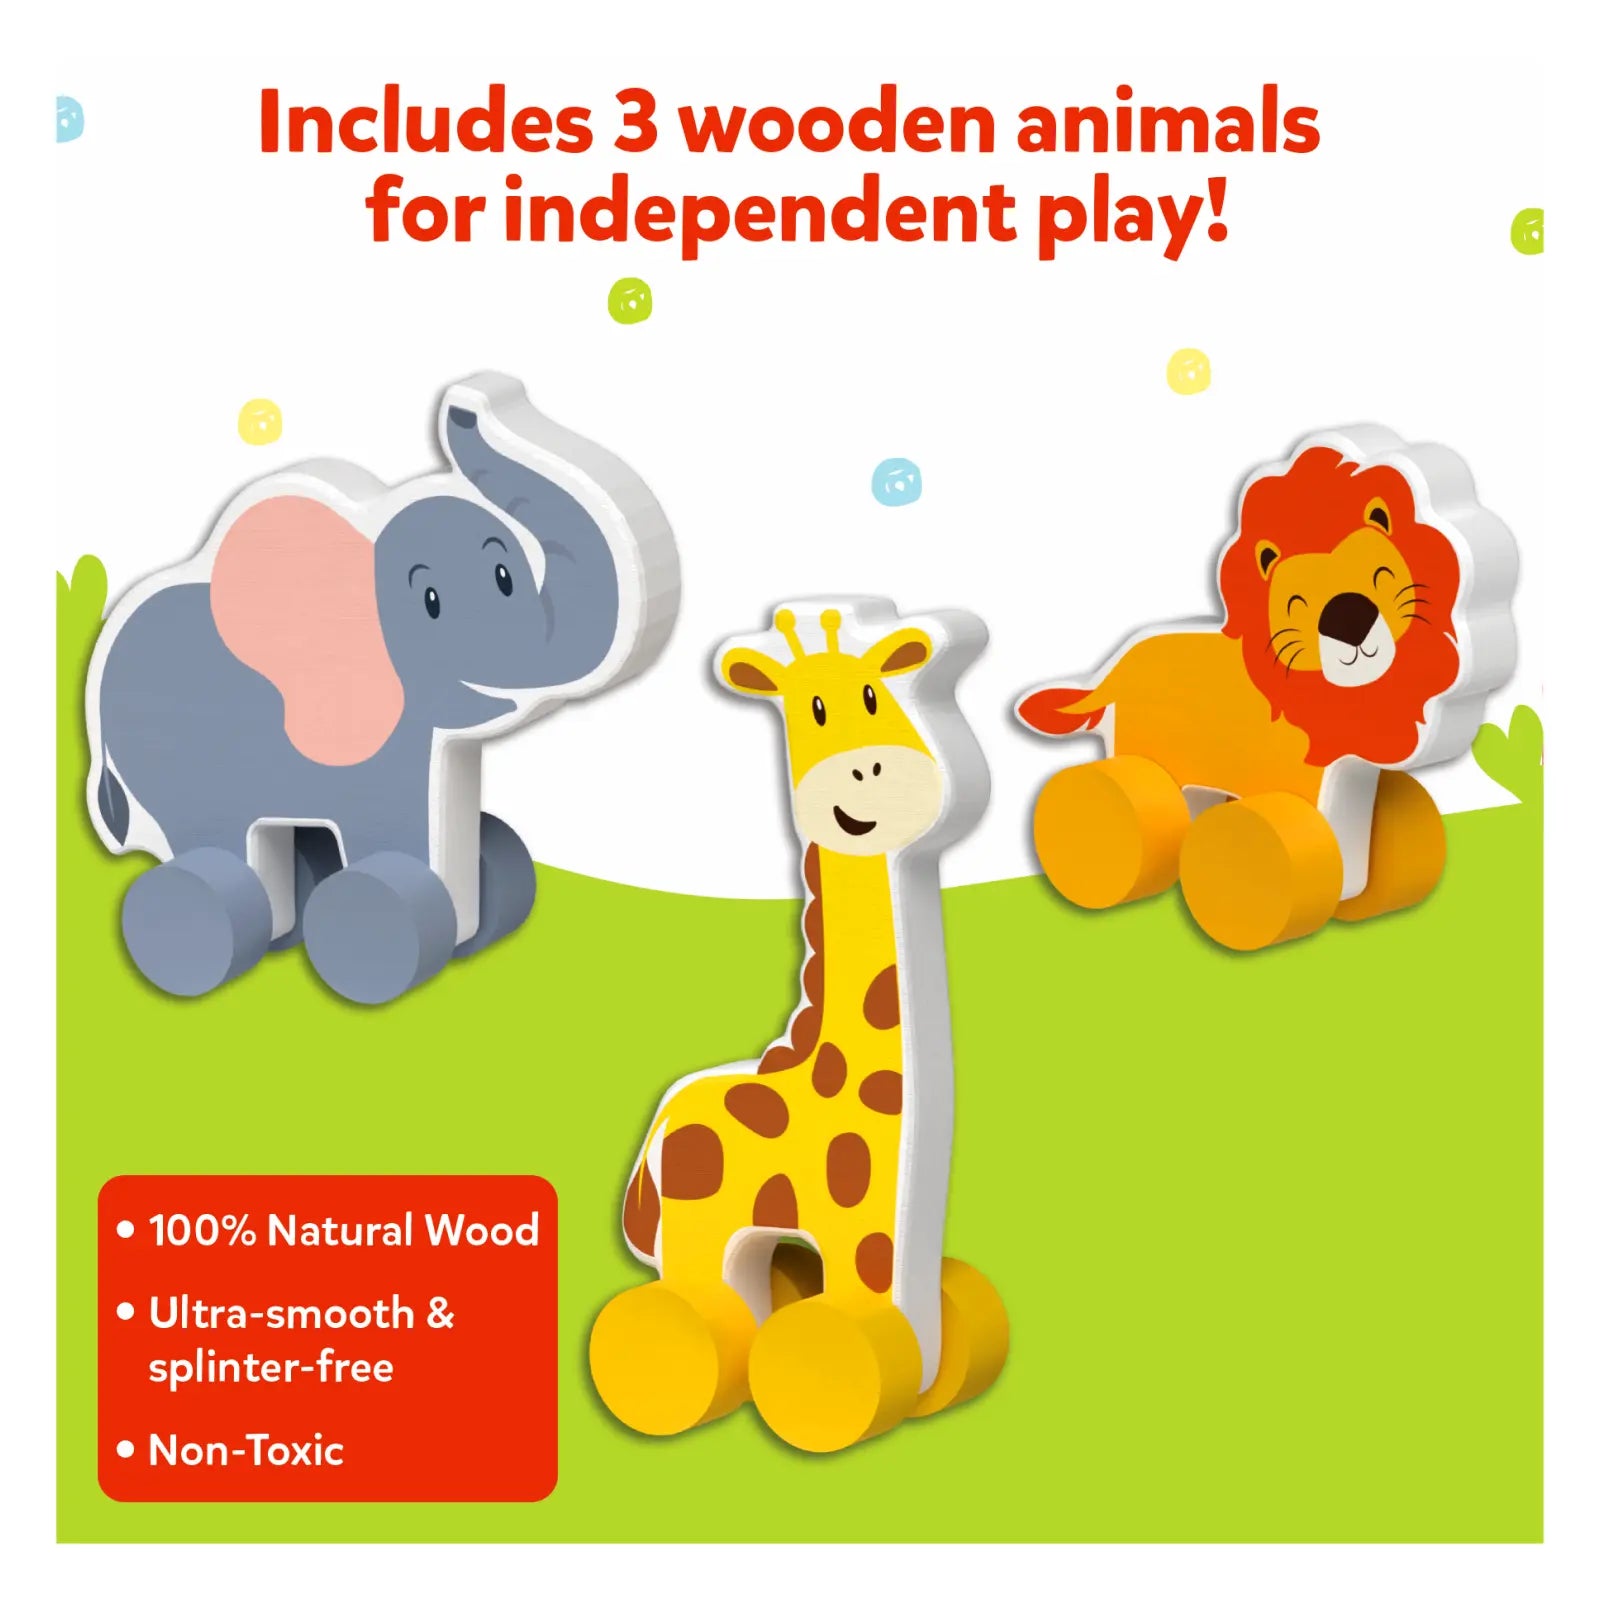 Animals on Wheels | Wooden Animal Toys on Wheels (9 months - 3 years)